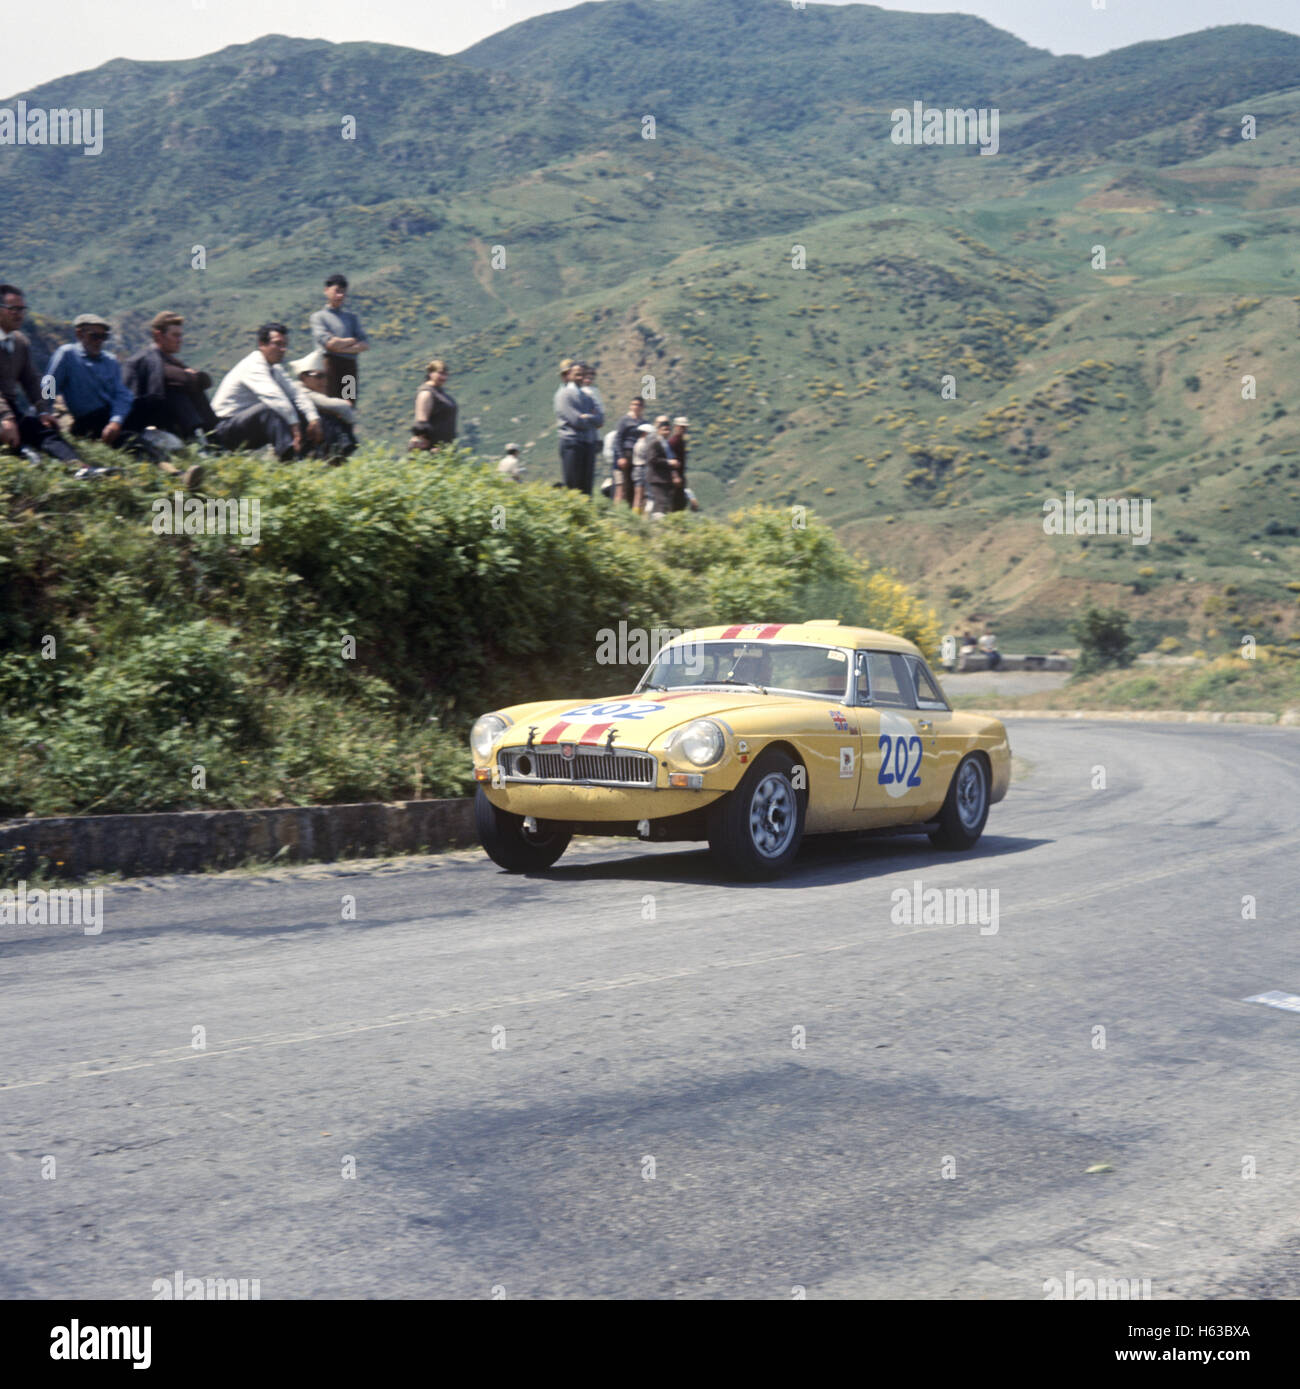 202 Peter Brown and Tony Fall in an MGB finished 24th in the Targa Florio 5 May 1968 Stock Photo